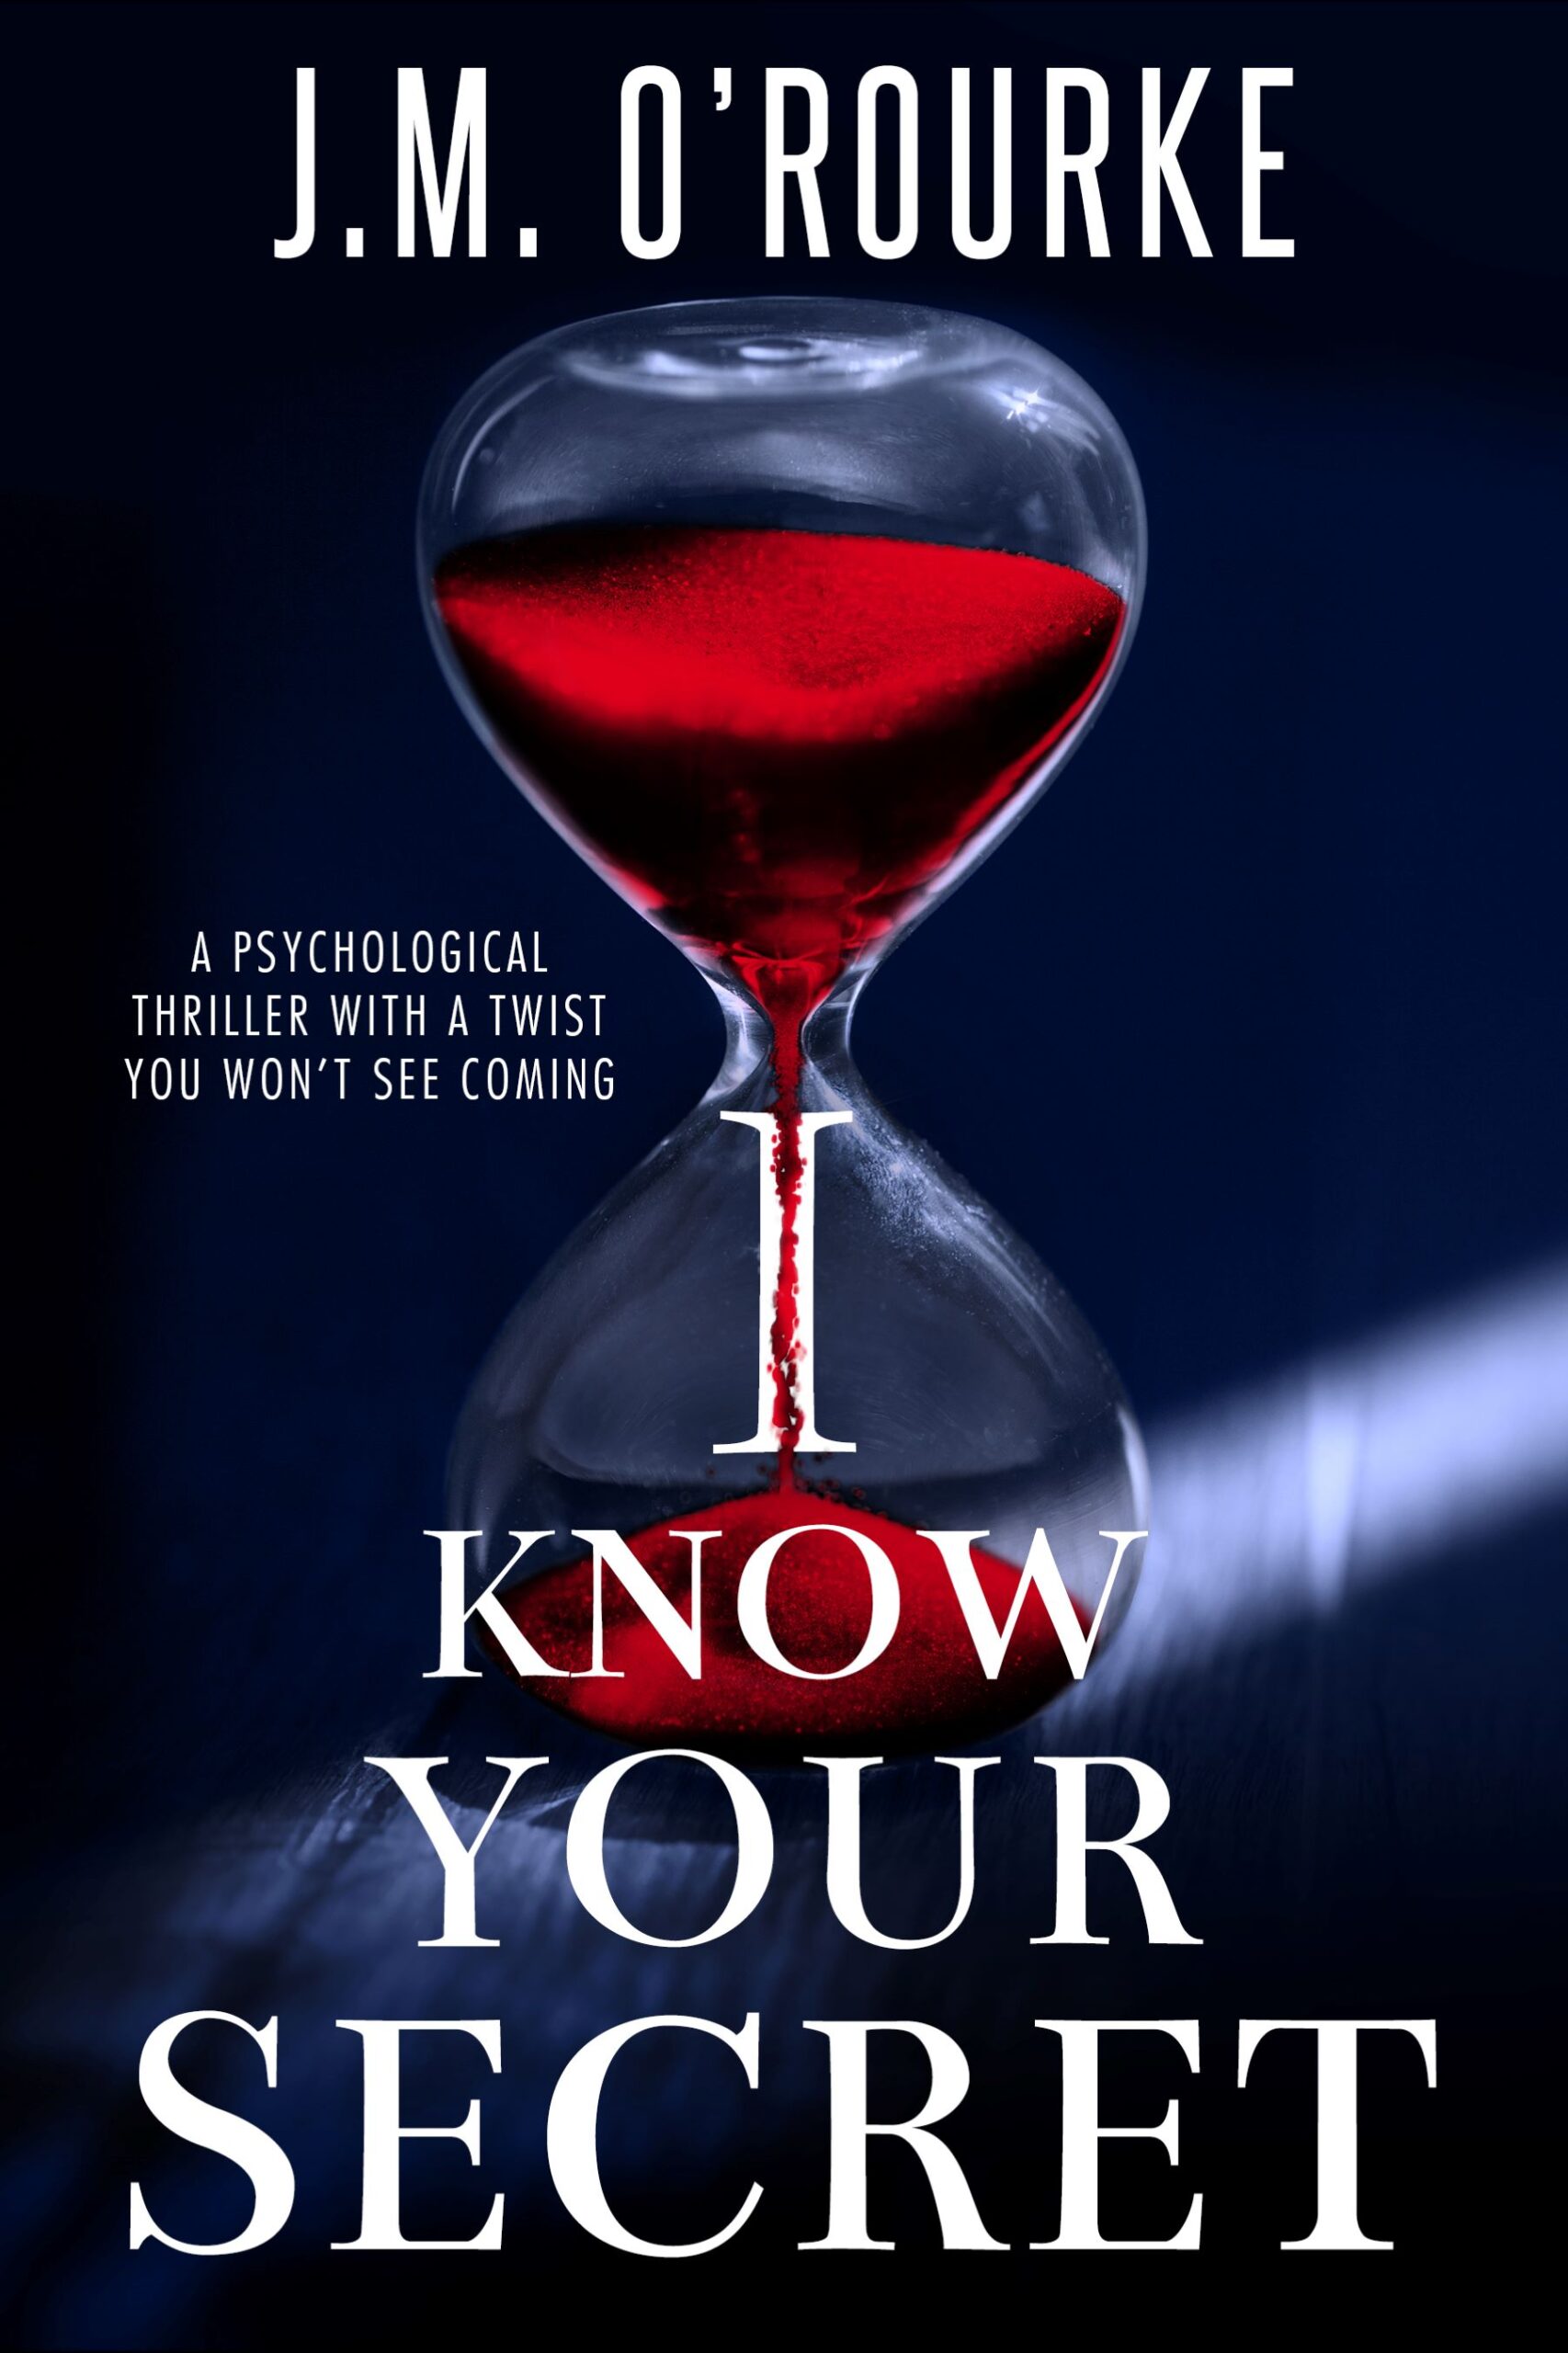 J.M. O’ROURKE NEW RELEASE – I KNOW YOUR SECRET